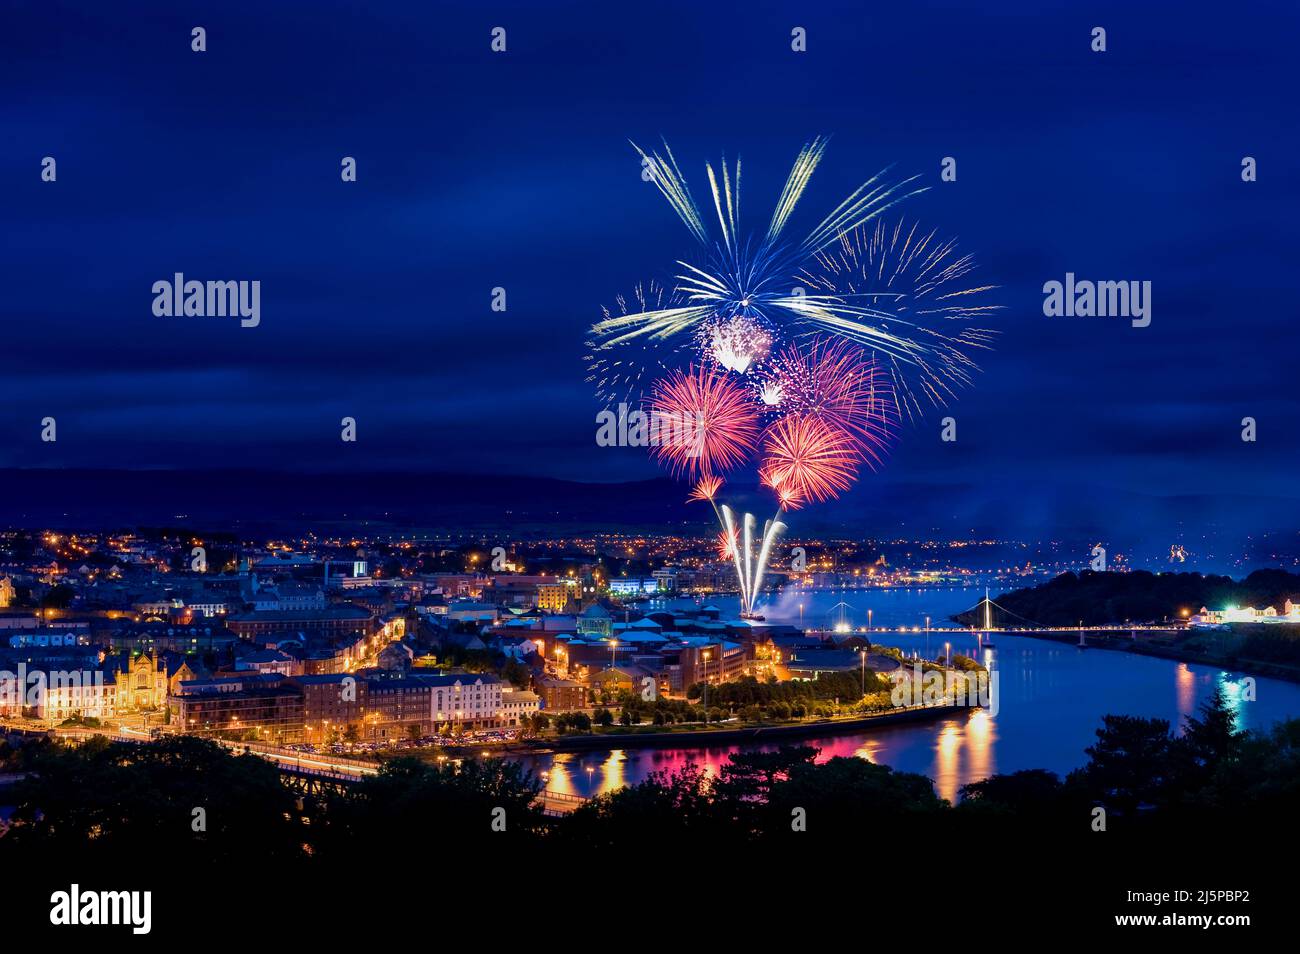 Firework display at Derry City, County Derry, Northern ireland Stock Photo